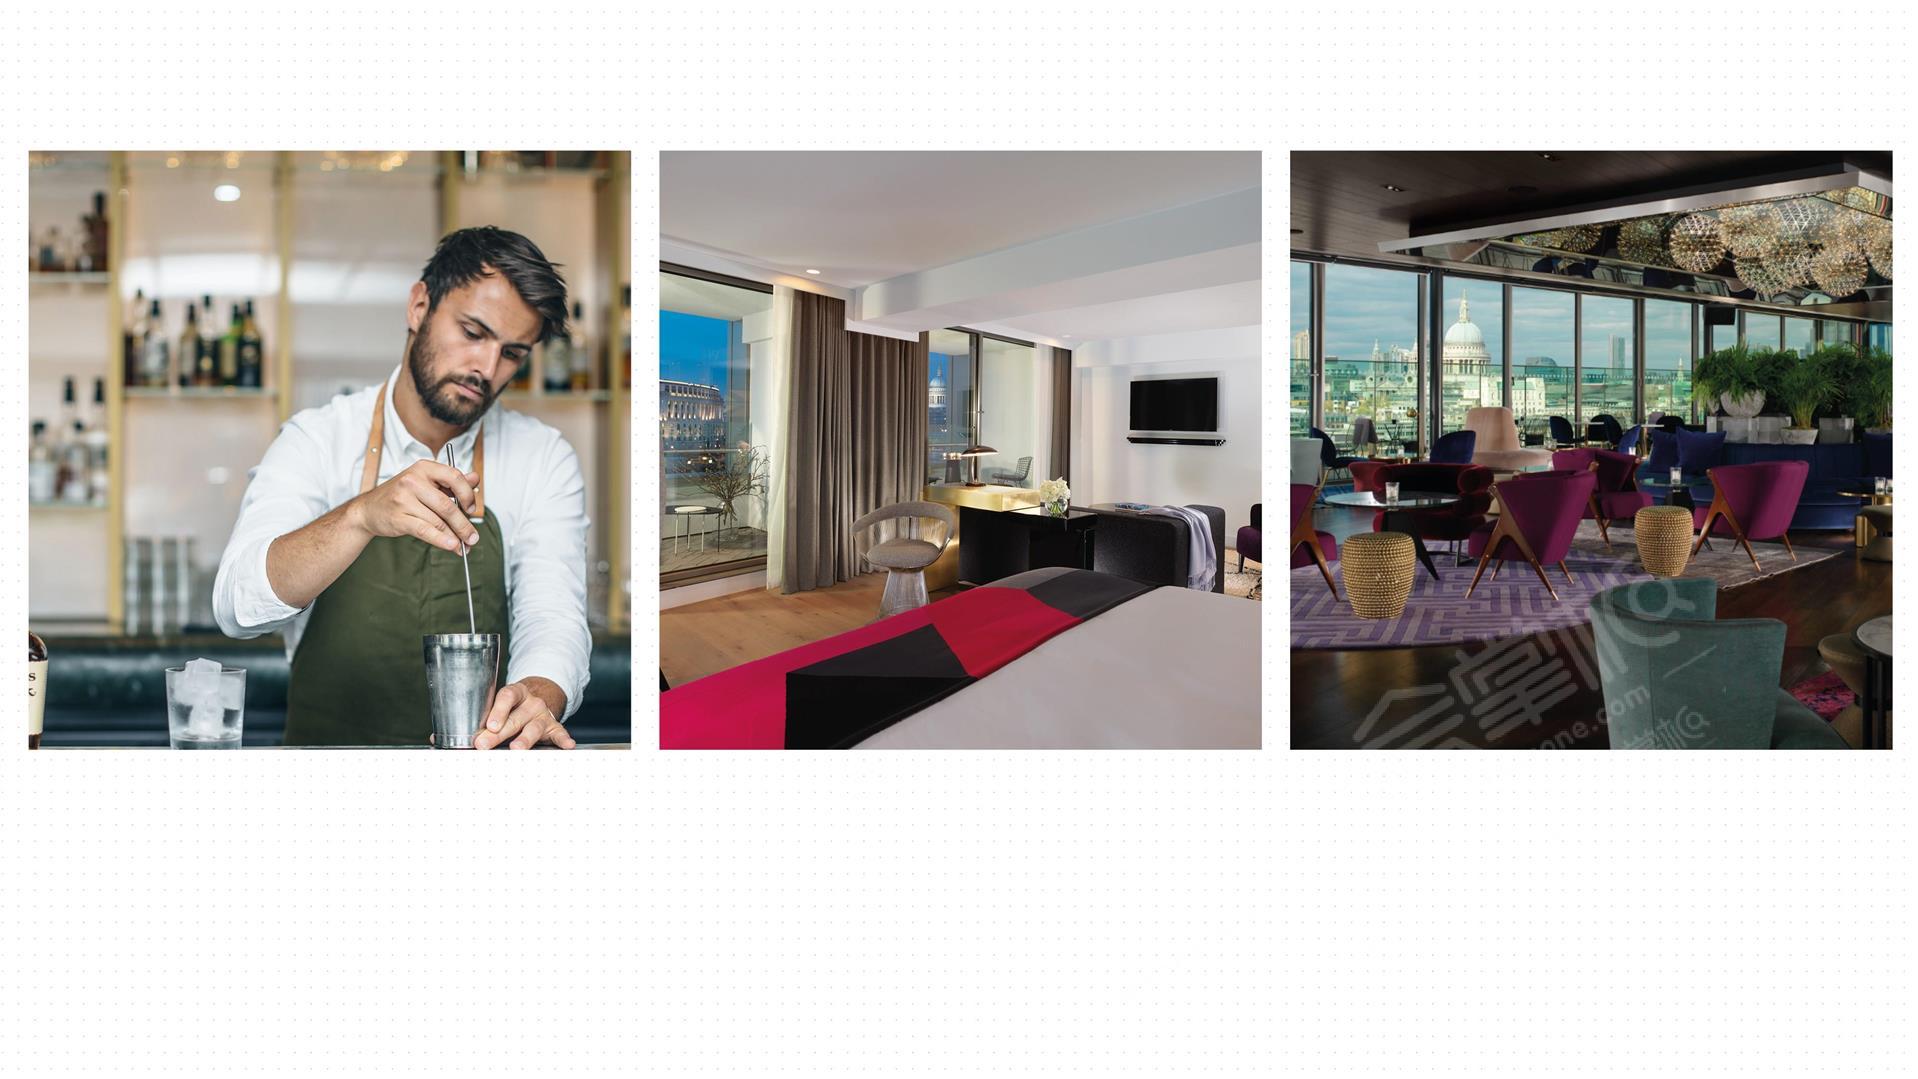 Sea Containers Hotel London - Lore Group